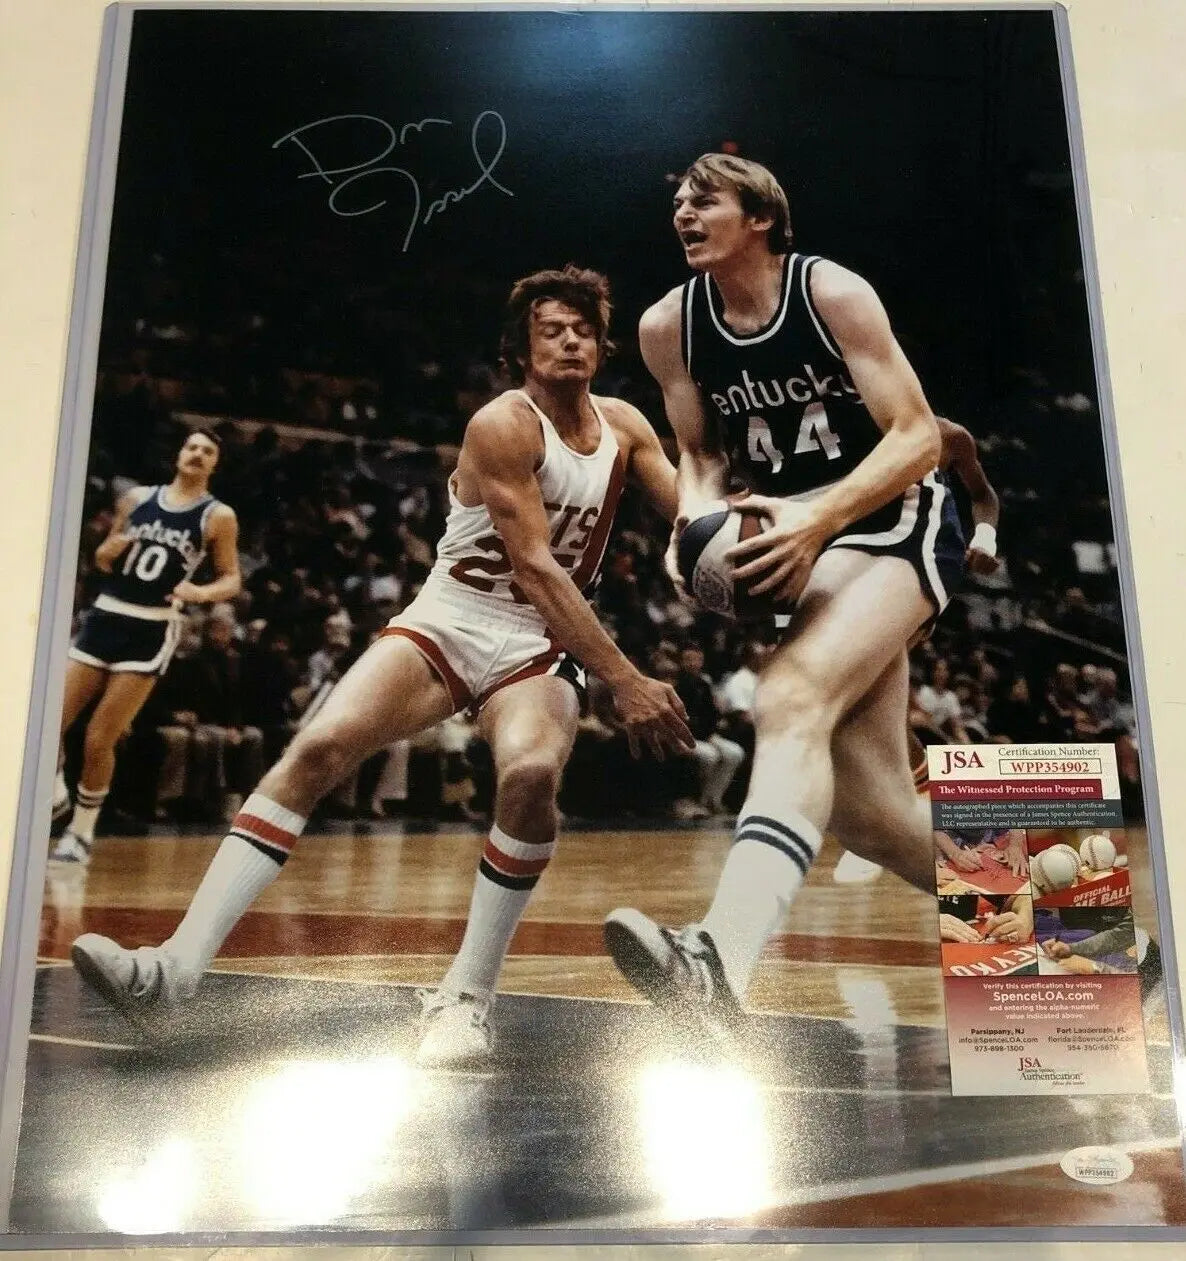 MVP Authentics Dan Issel Autographed Signed Kentucky Colonels 16X20 Photo Jsa Coa 81 sports jersey framing , jersey framing